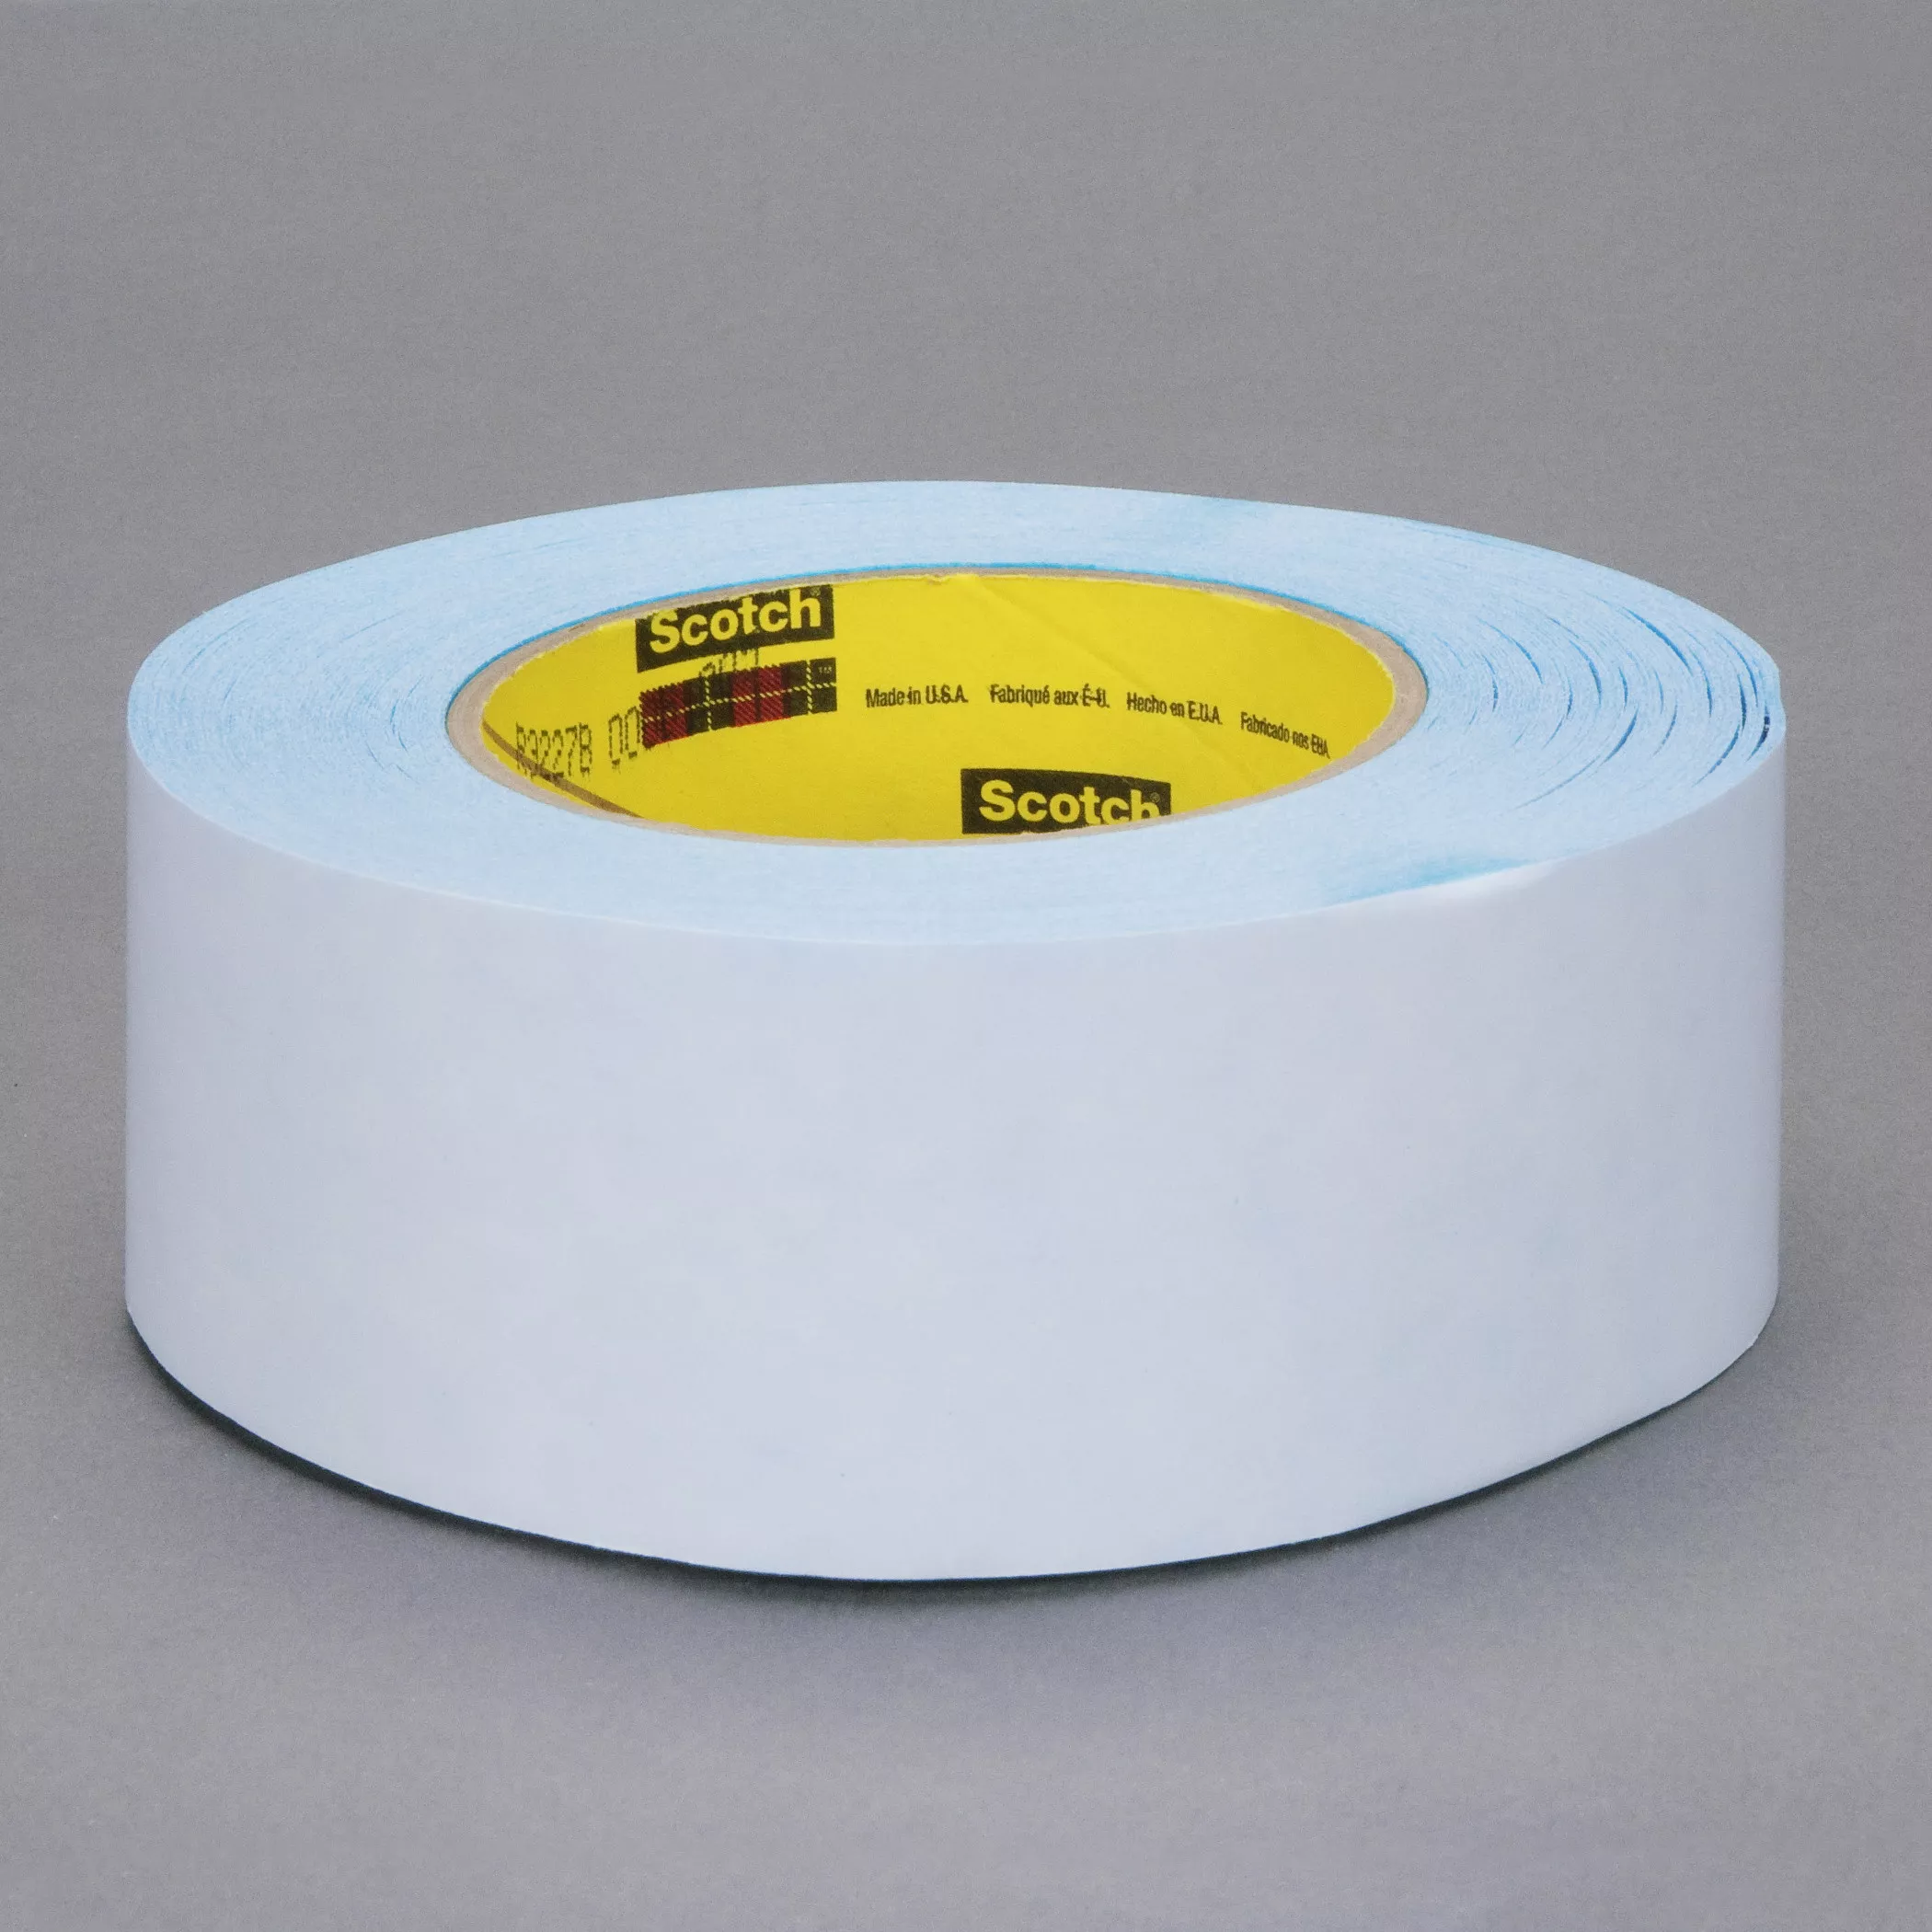 3M™ Repulpable Double Coated Tape R3227, Blue, 36 mm x 55 m, 3.5 mil, 24
Roll/Case